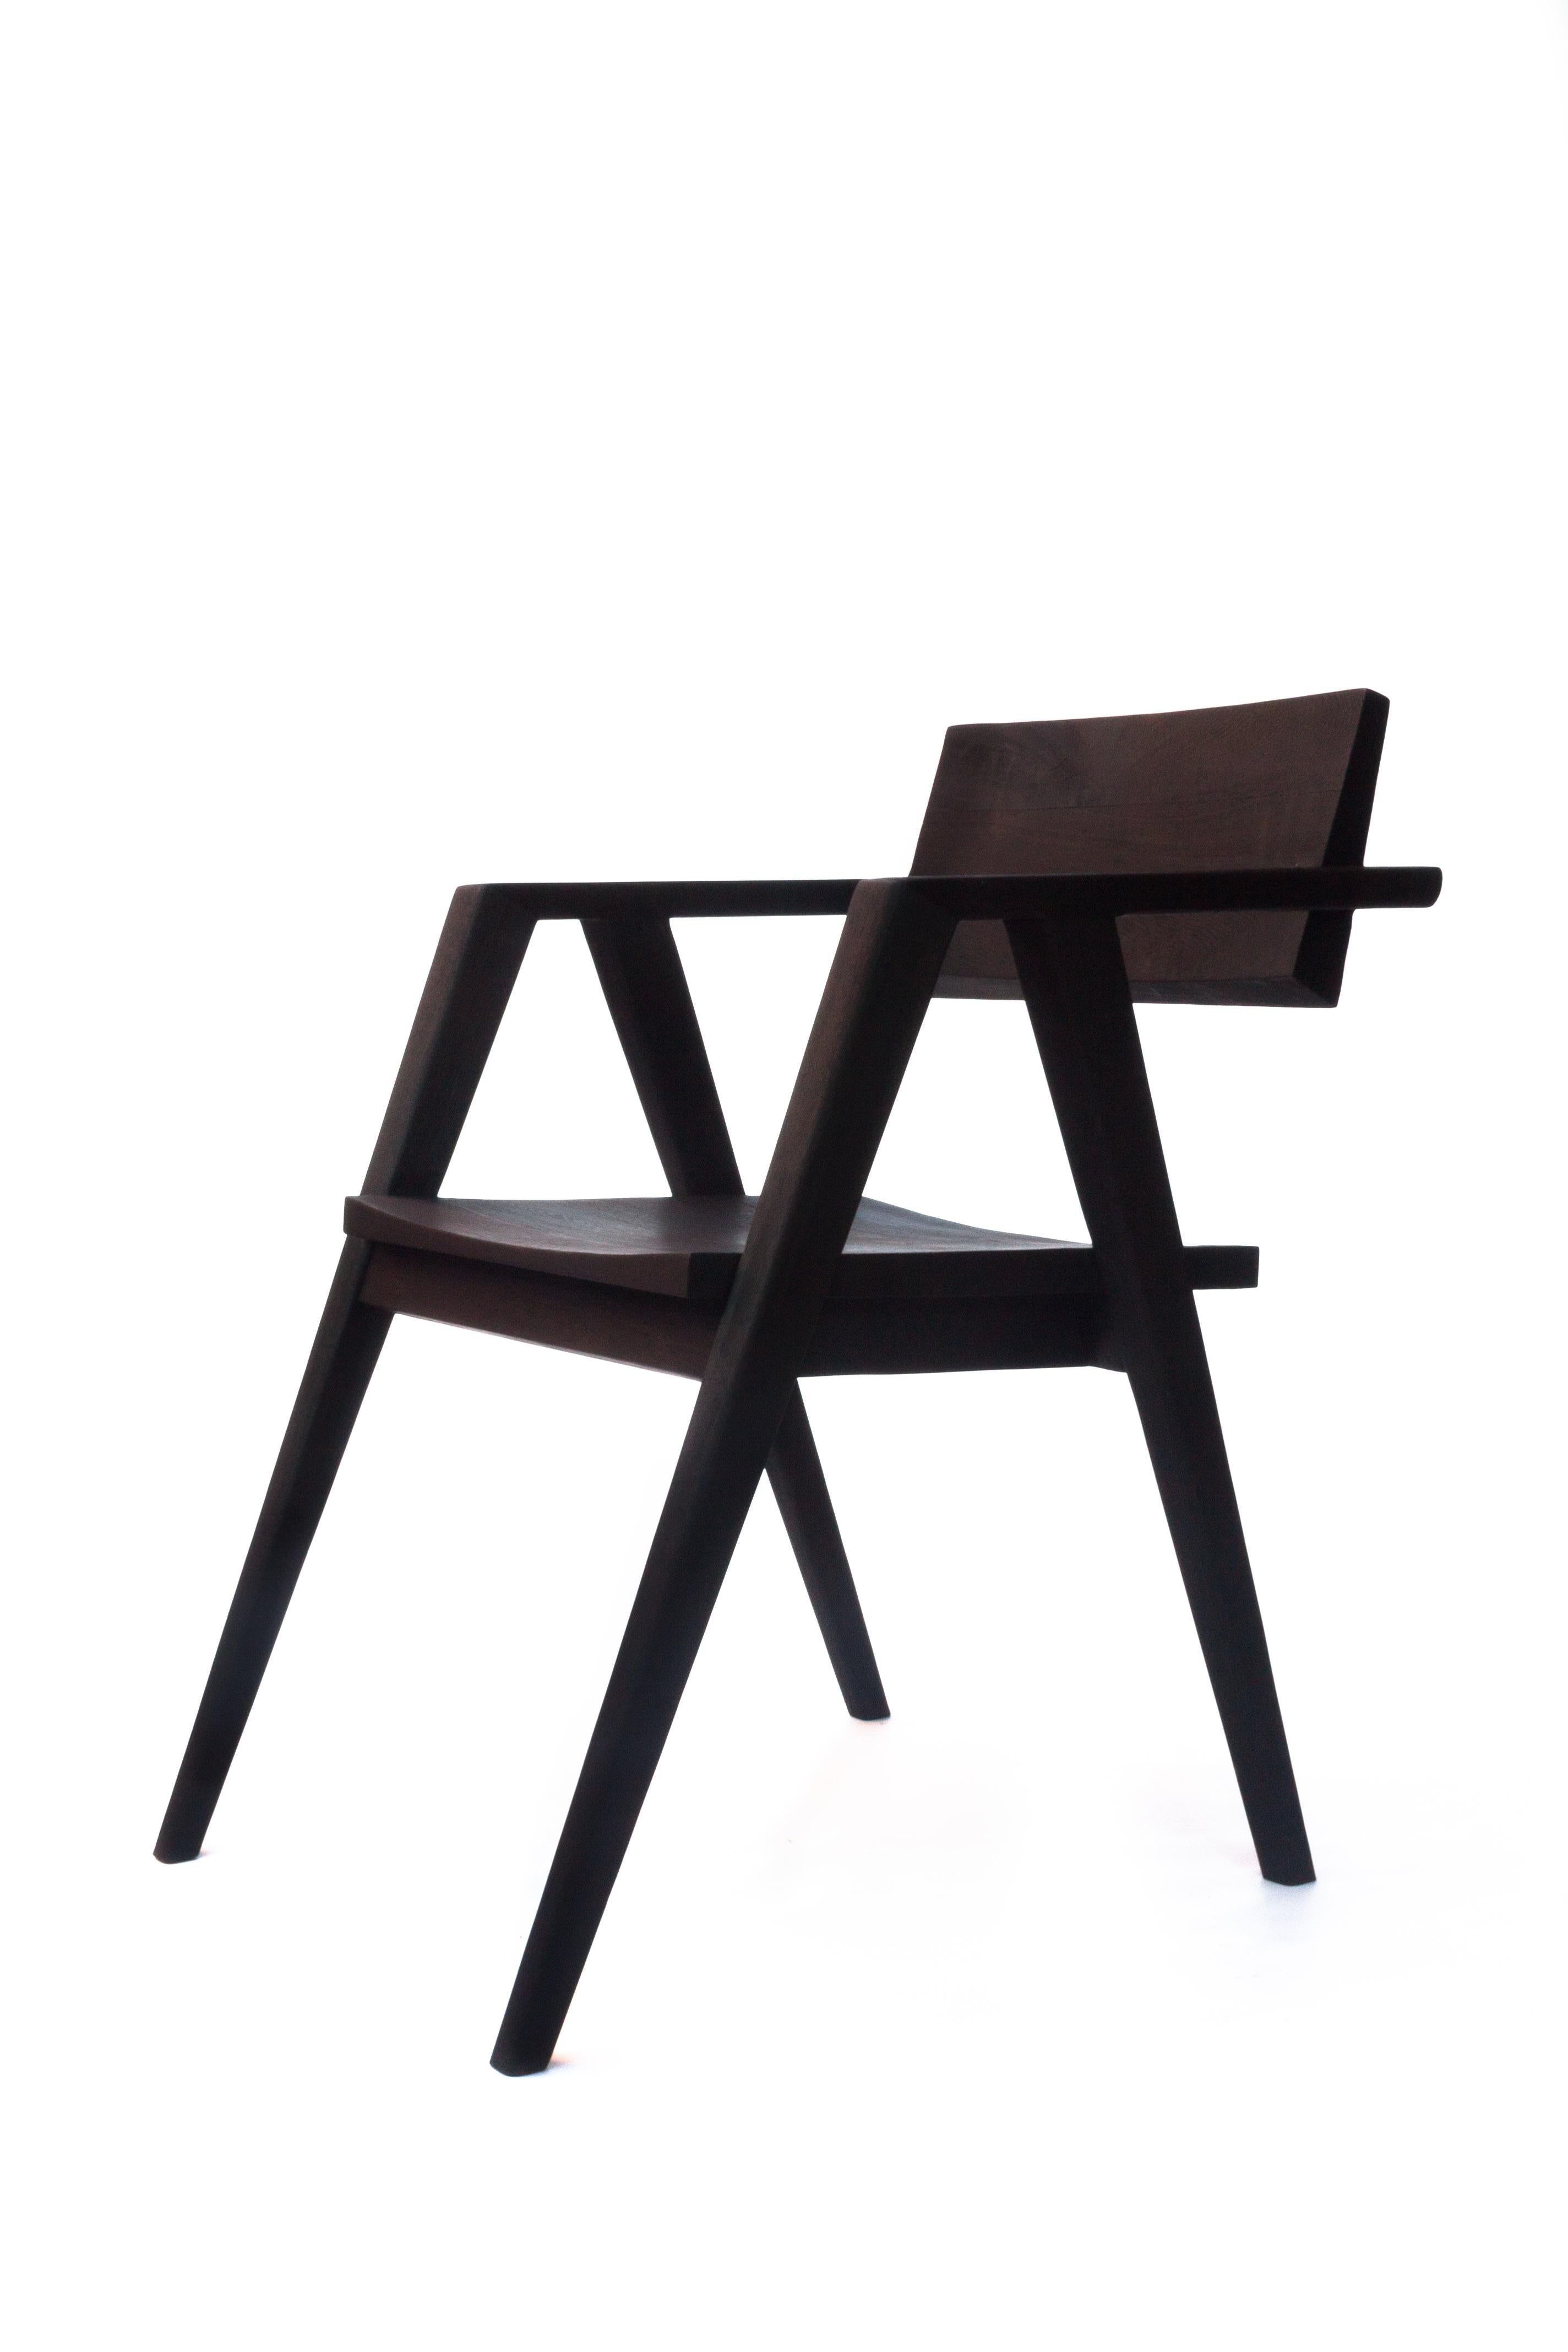 Wood Abraxas Chair, by Camilo Andres Rodriguez Marquez